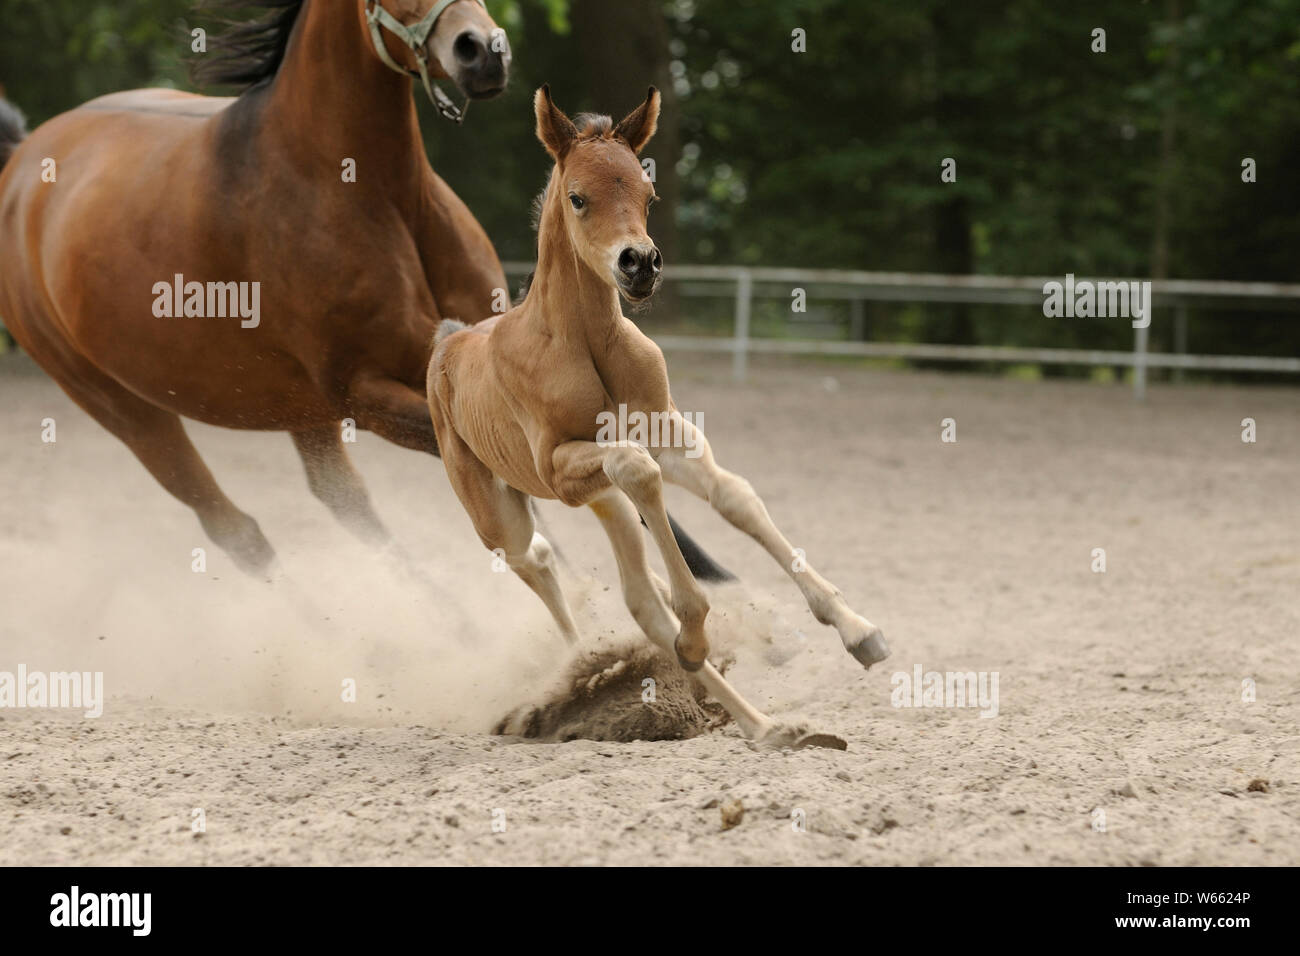 Arabian horse, mare with colt galloping in paddock Stock Photo